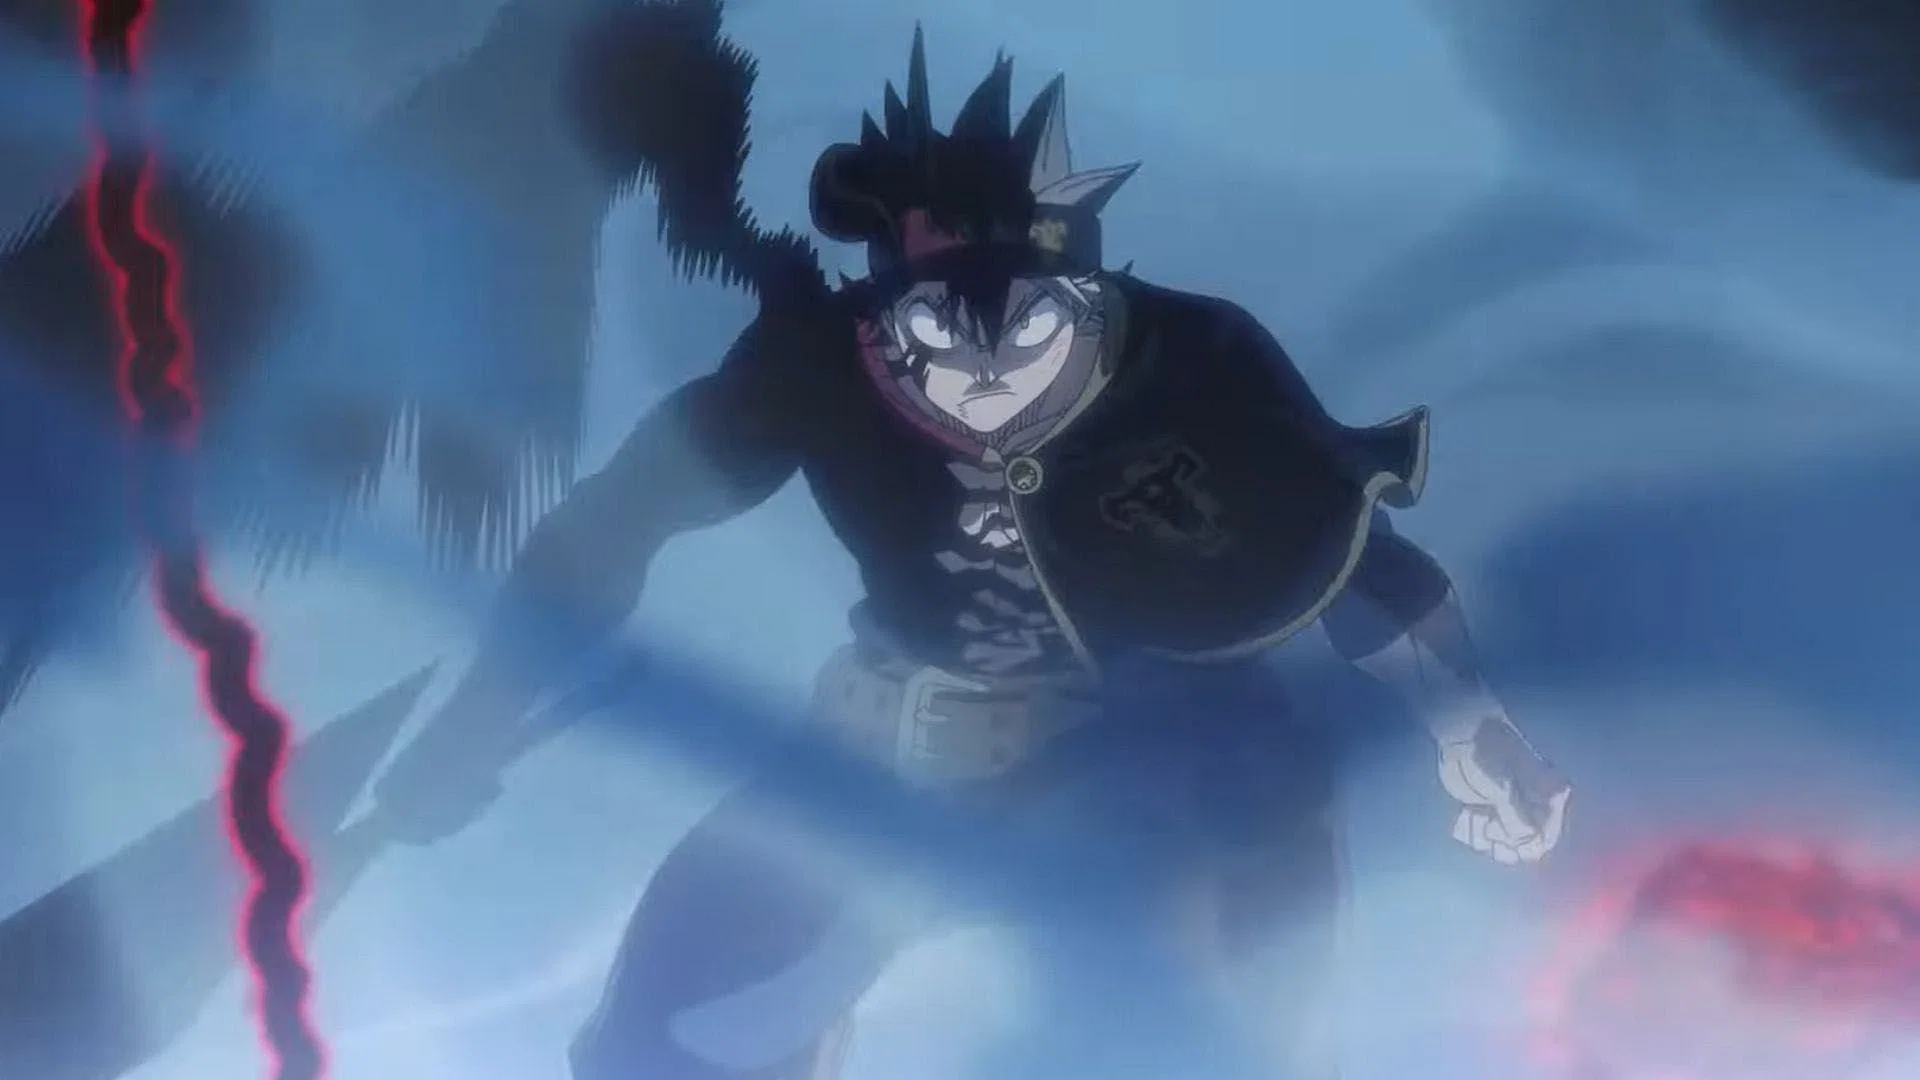 Leaked Black Clover Movie Image Reveals Asta's New Transformation